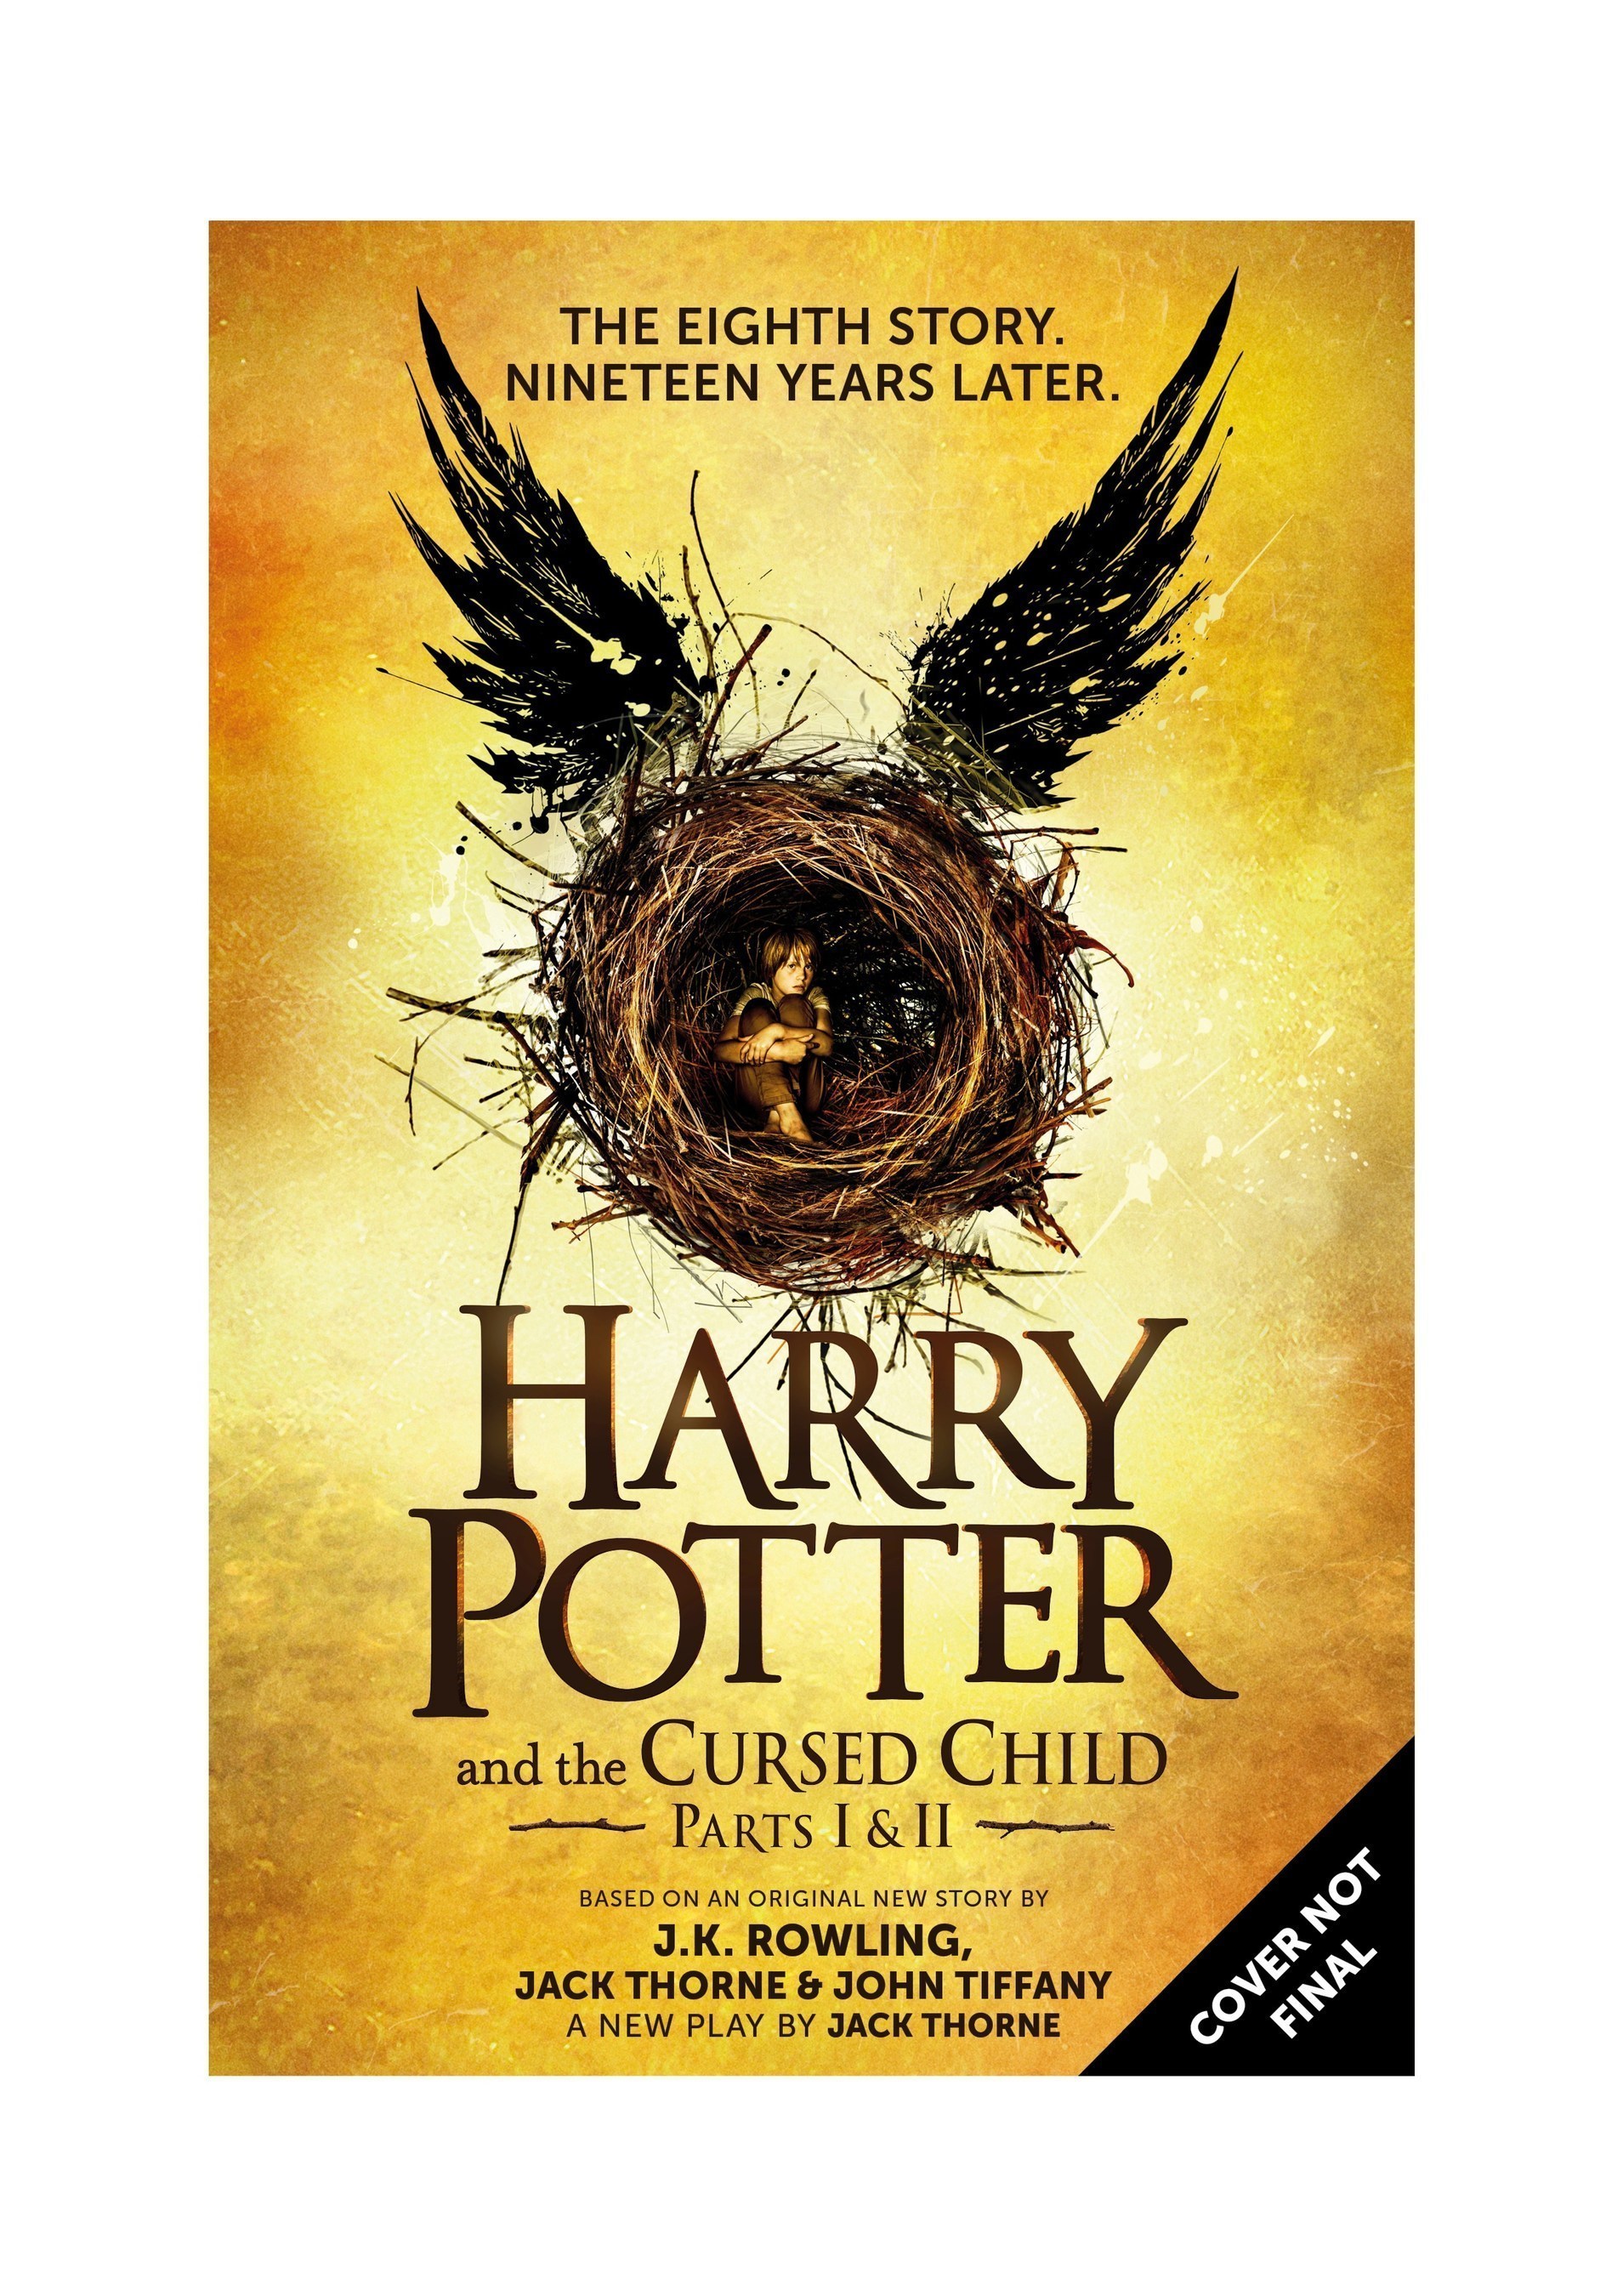 Scholastic to Publish Harry Potter and the Cursed Child Script Book in the U.S. and Canada